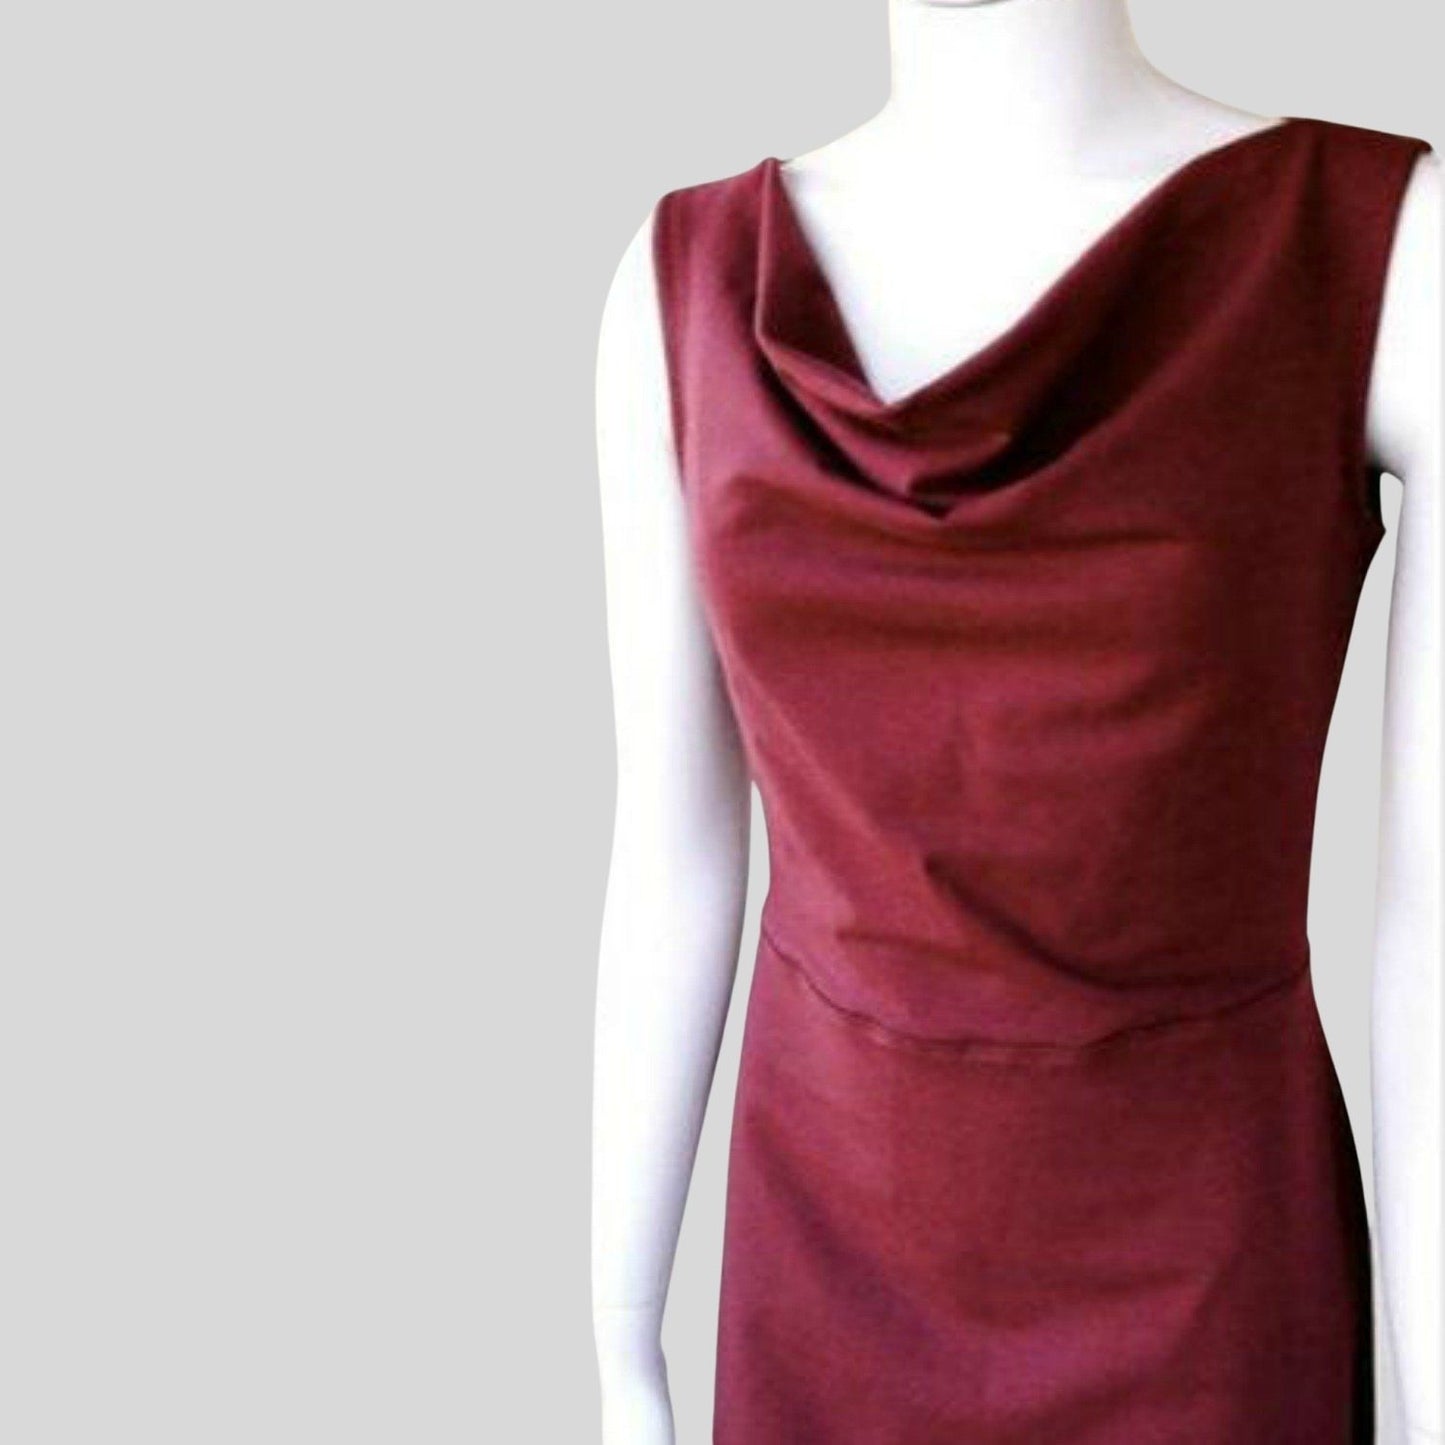 Wine red Long sleeveless boatneck dress | Buy made in Canada organic cotton dresses